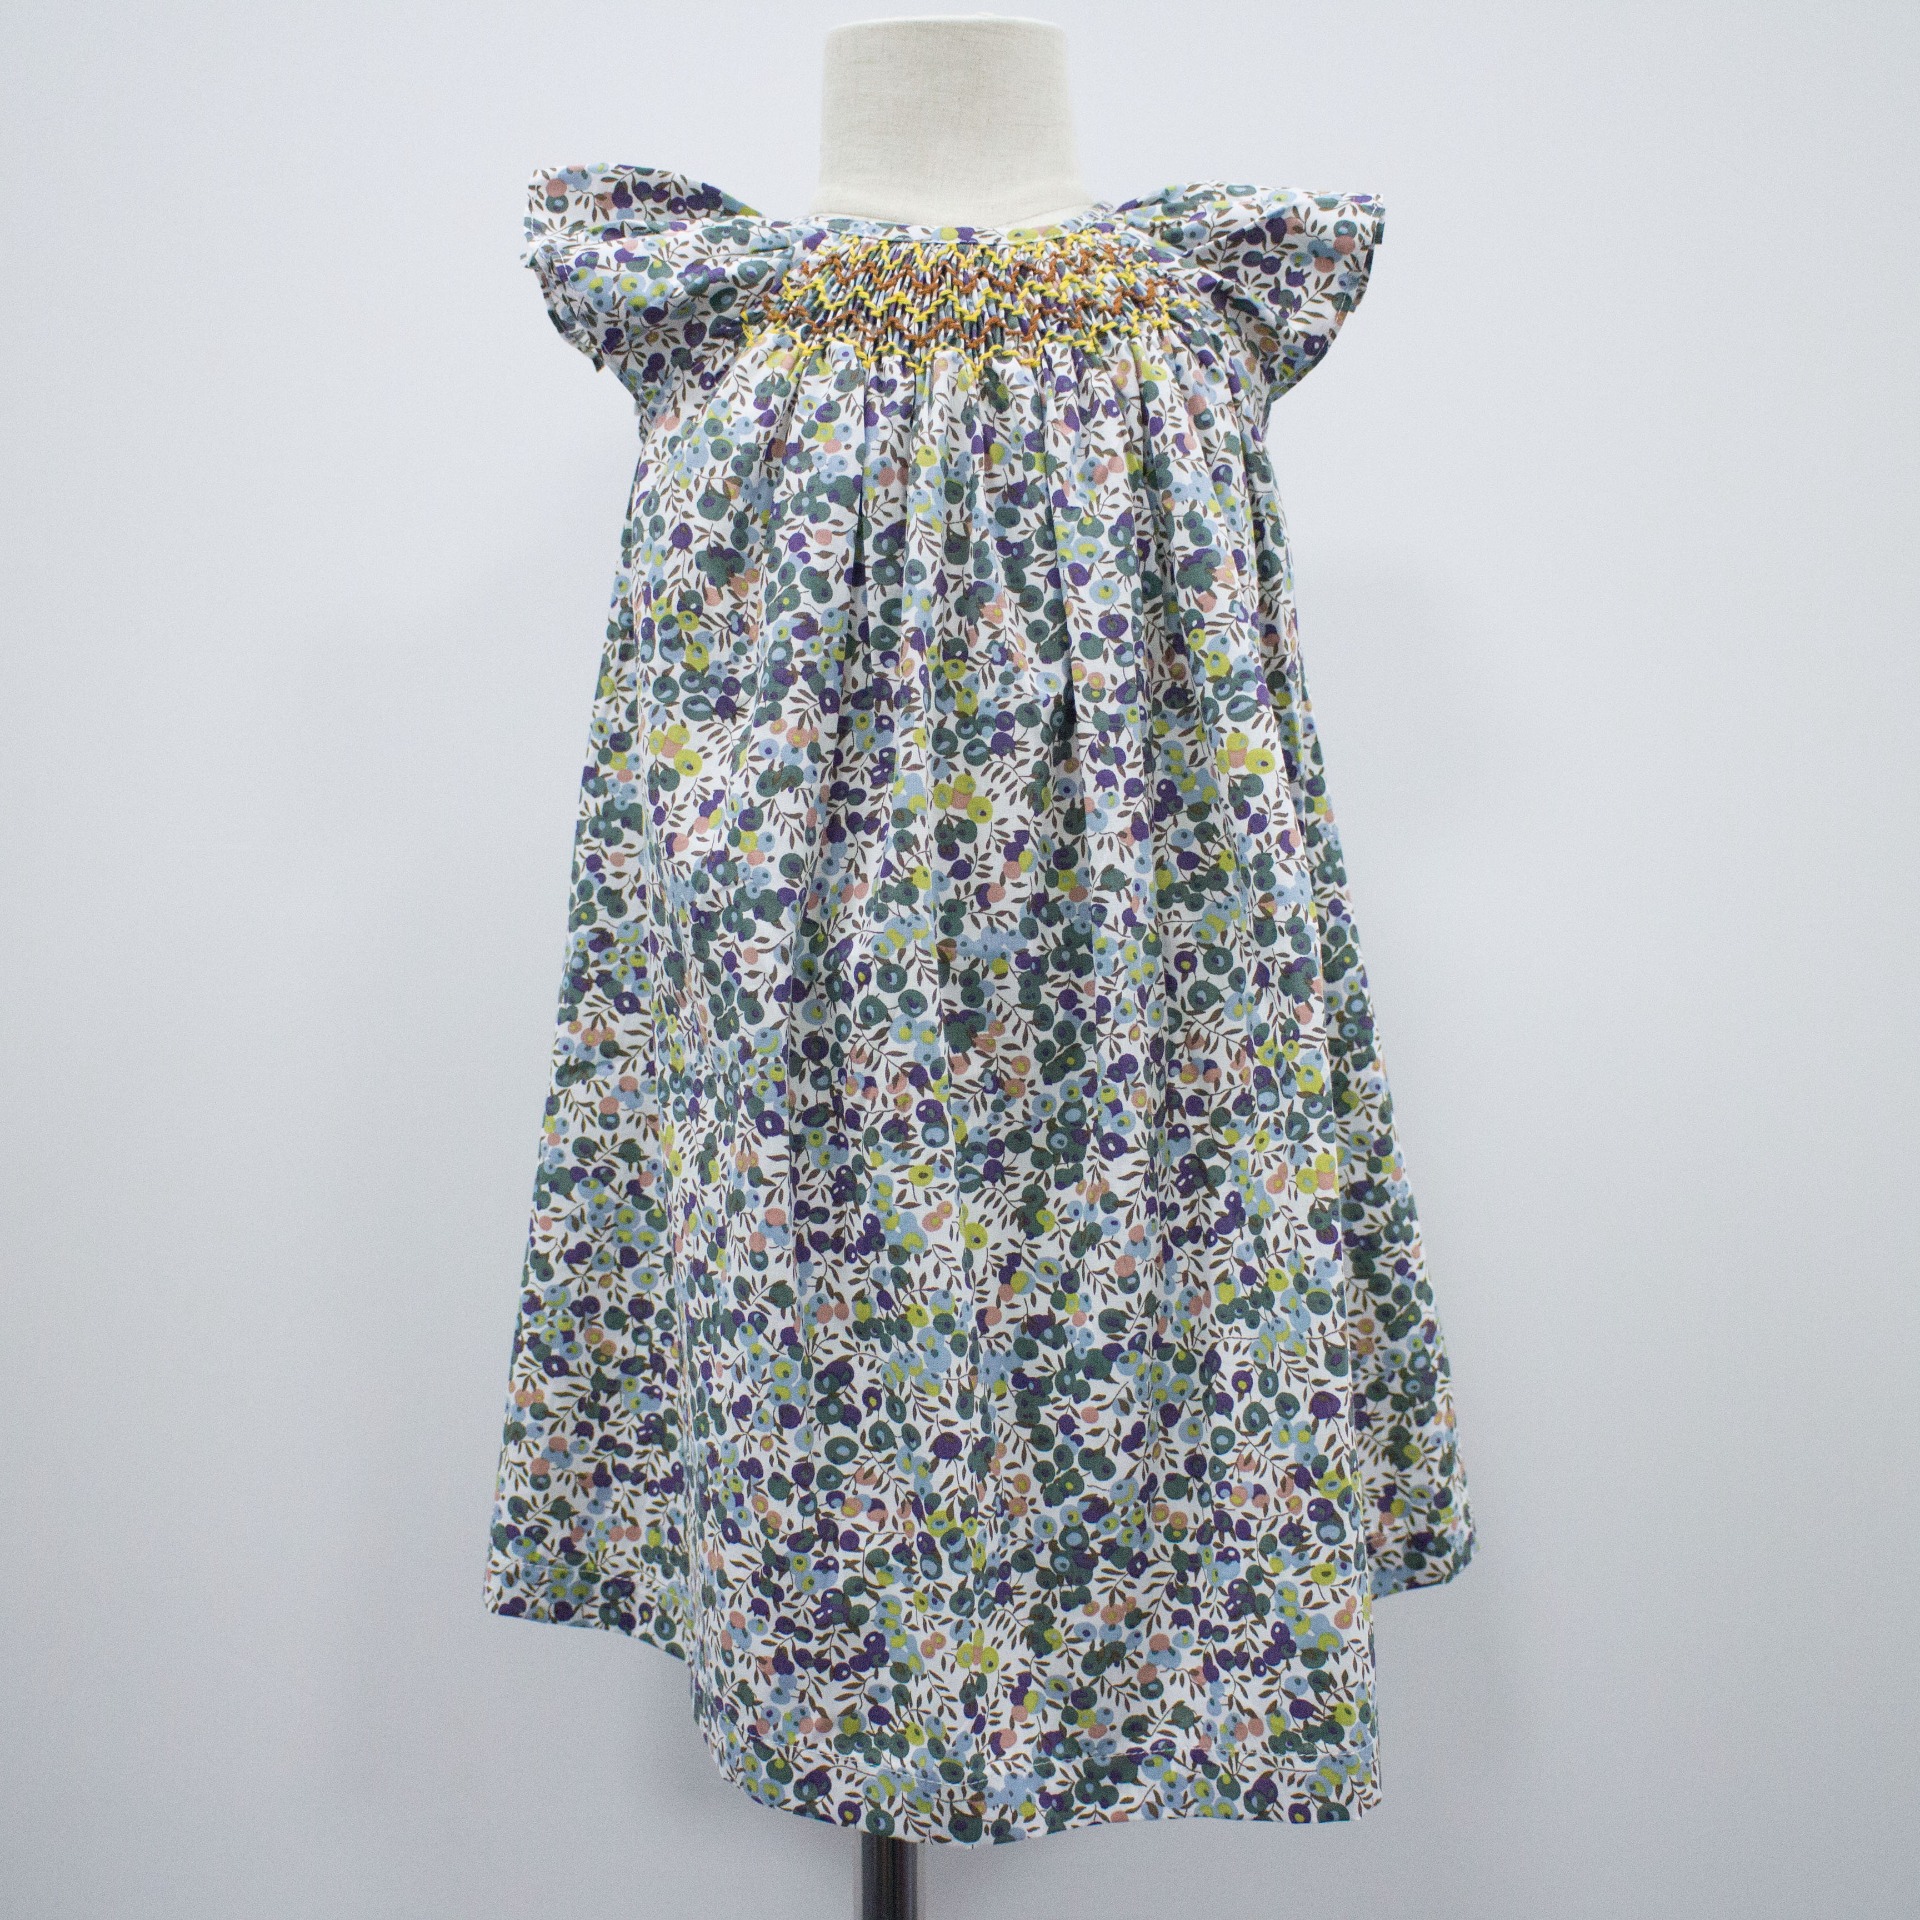 handmade smocked dress 2022 printed hand-gathered embroidered cotton  round neck sleeveless A-line skirt for baby